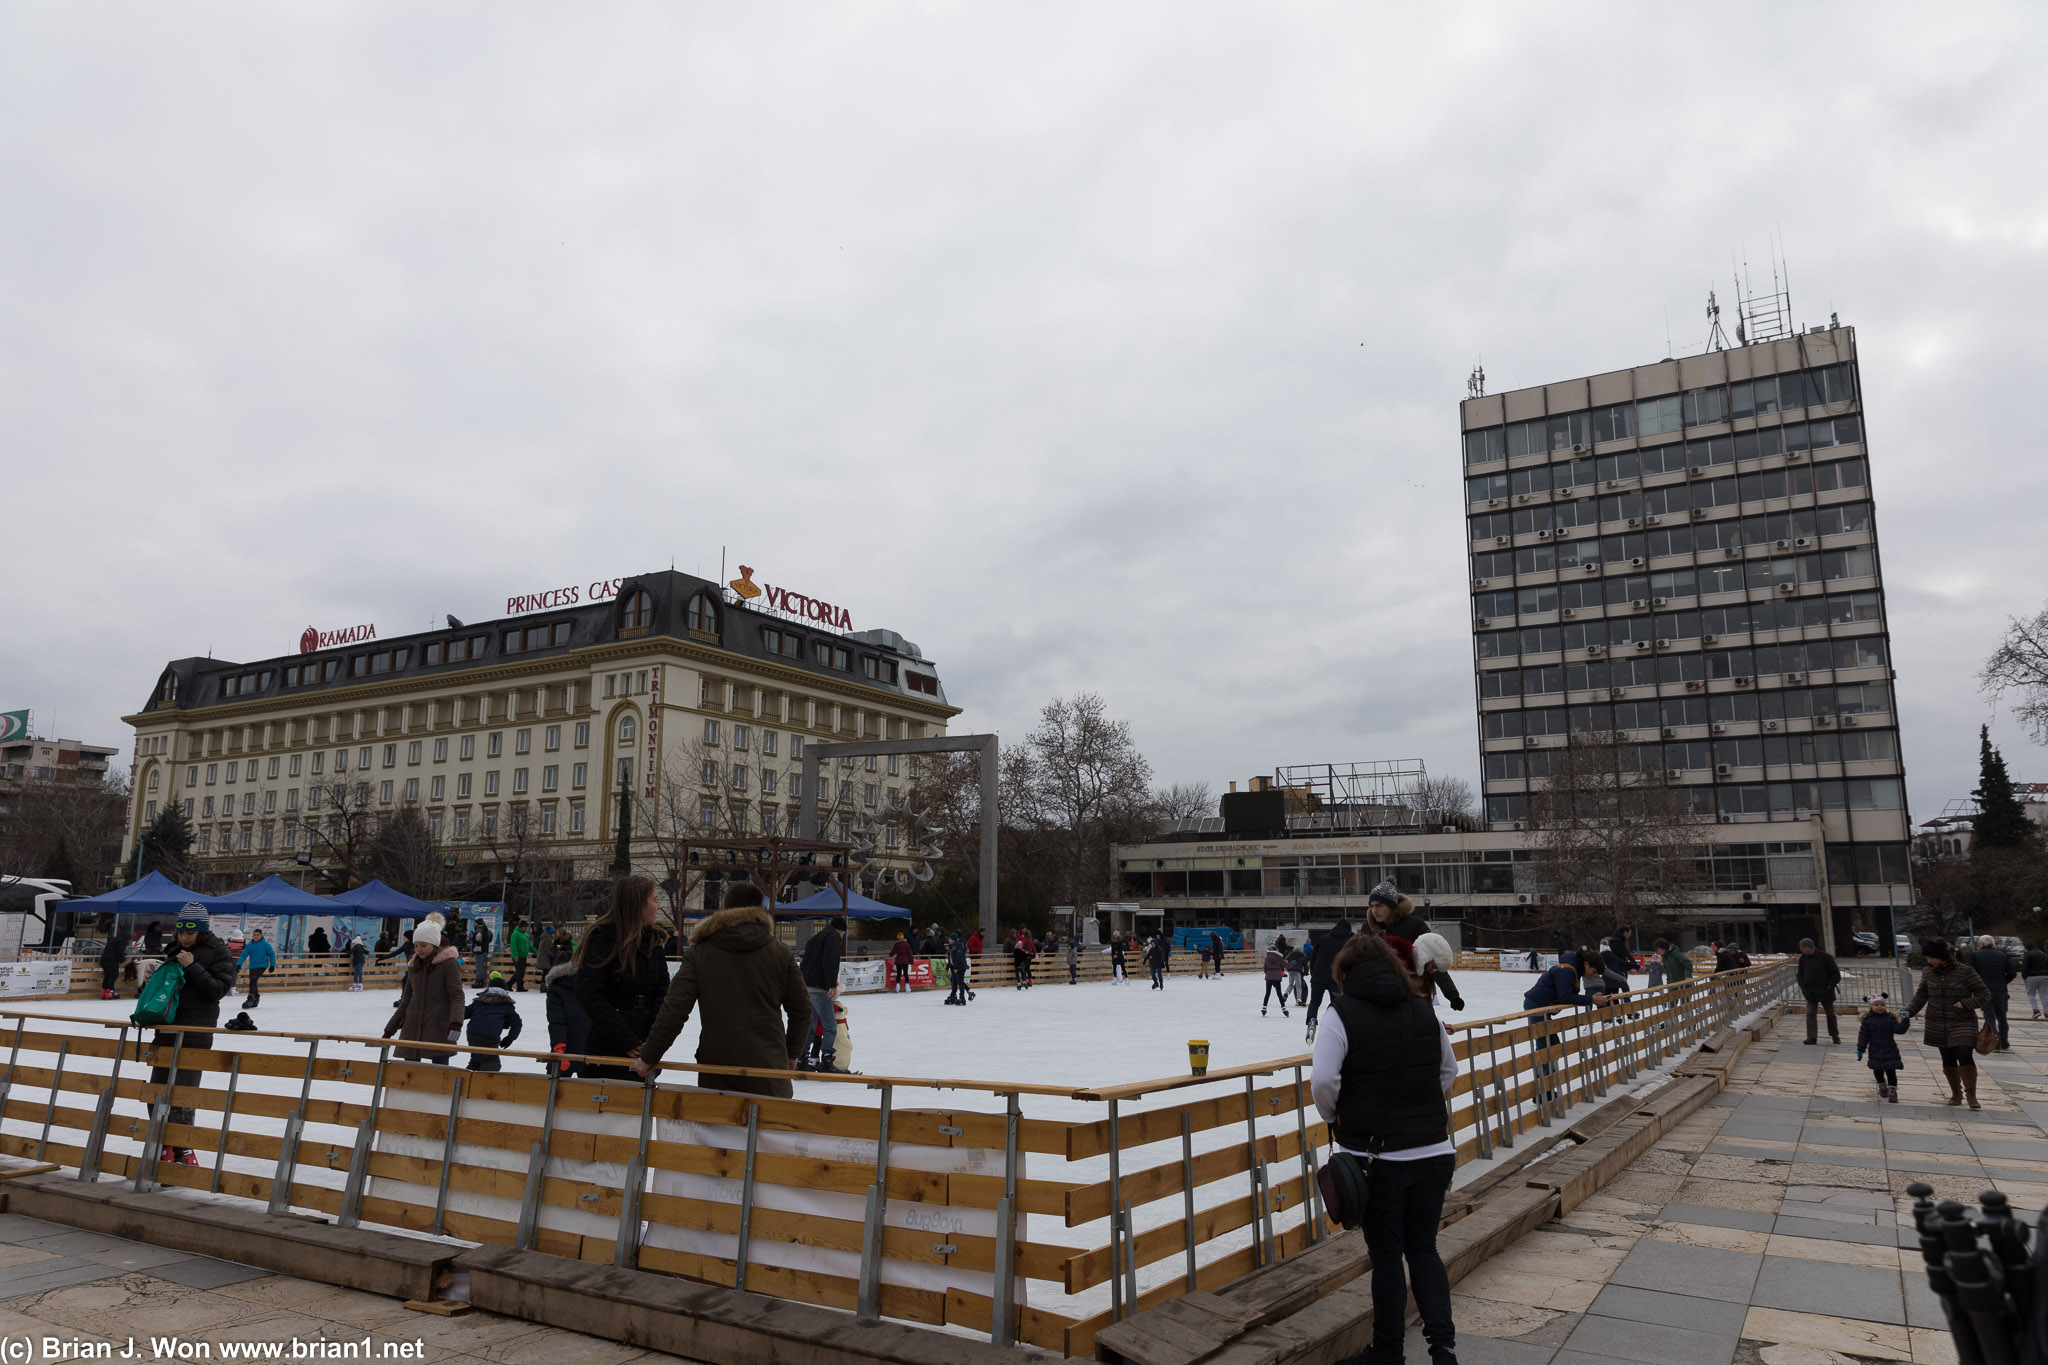 The center of activity-- the ice rink!